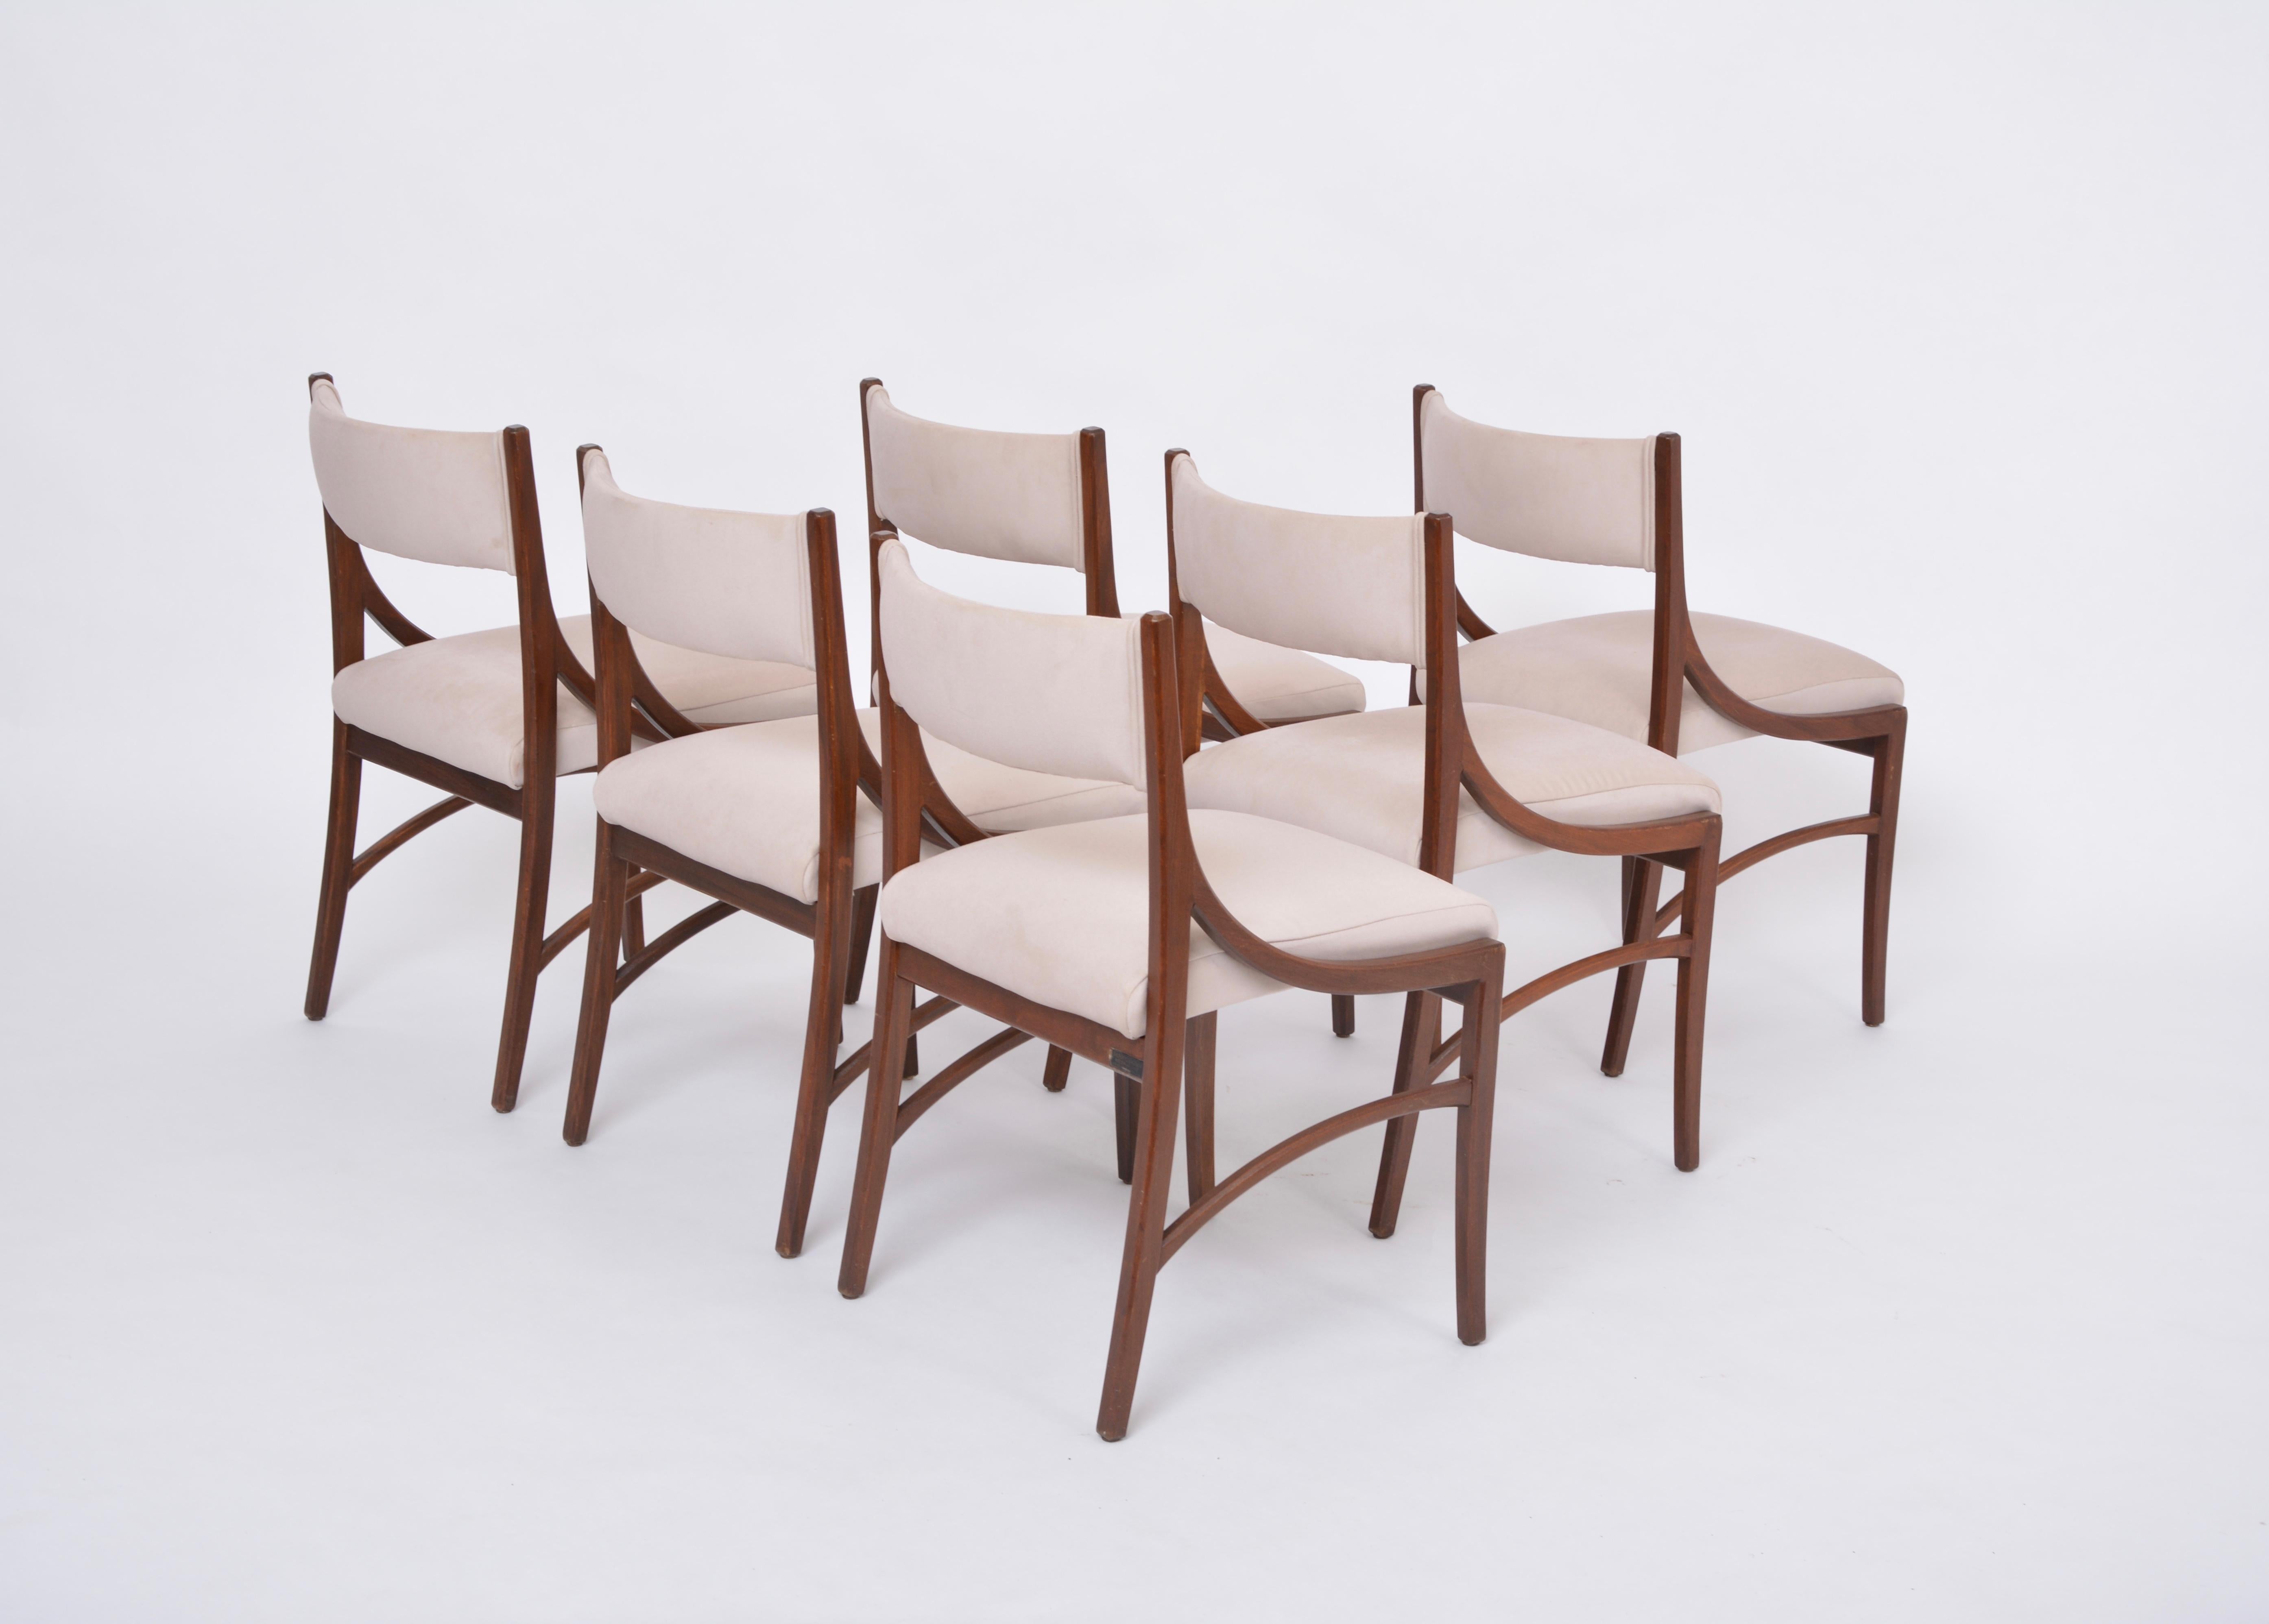 Set of six Mid-Century Modern Beige Dining Chairs by Ico Parisi for Cassina 1